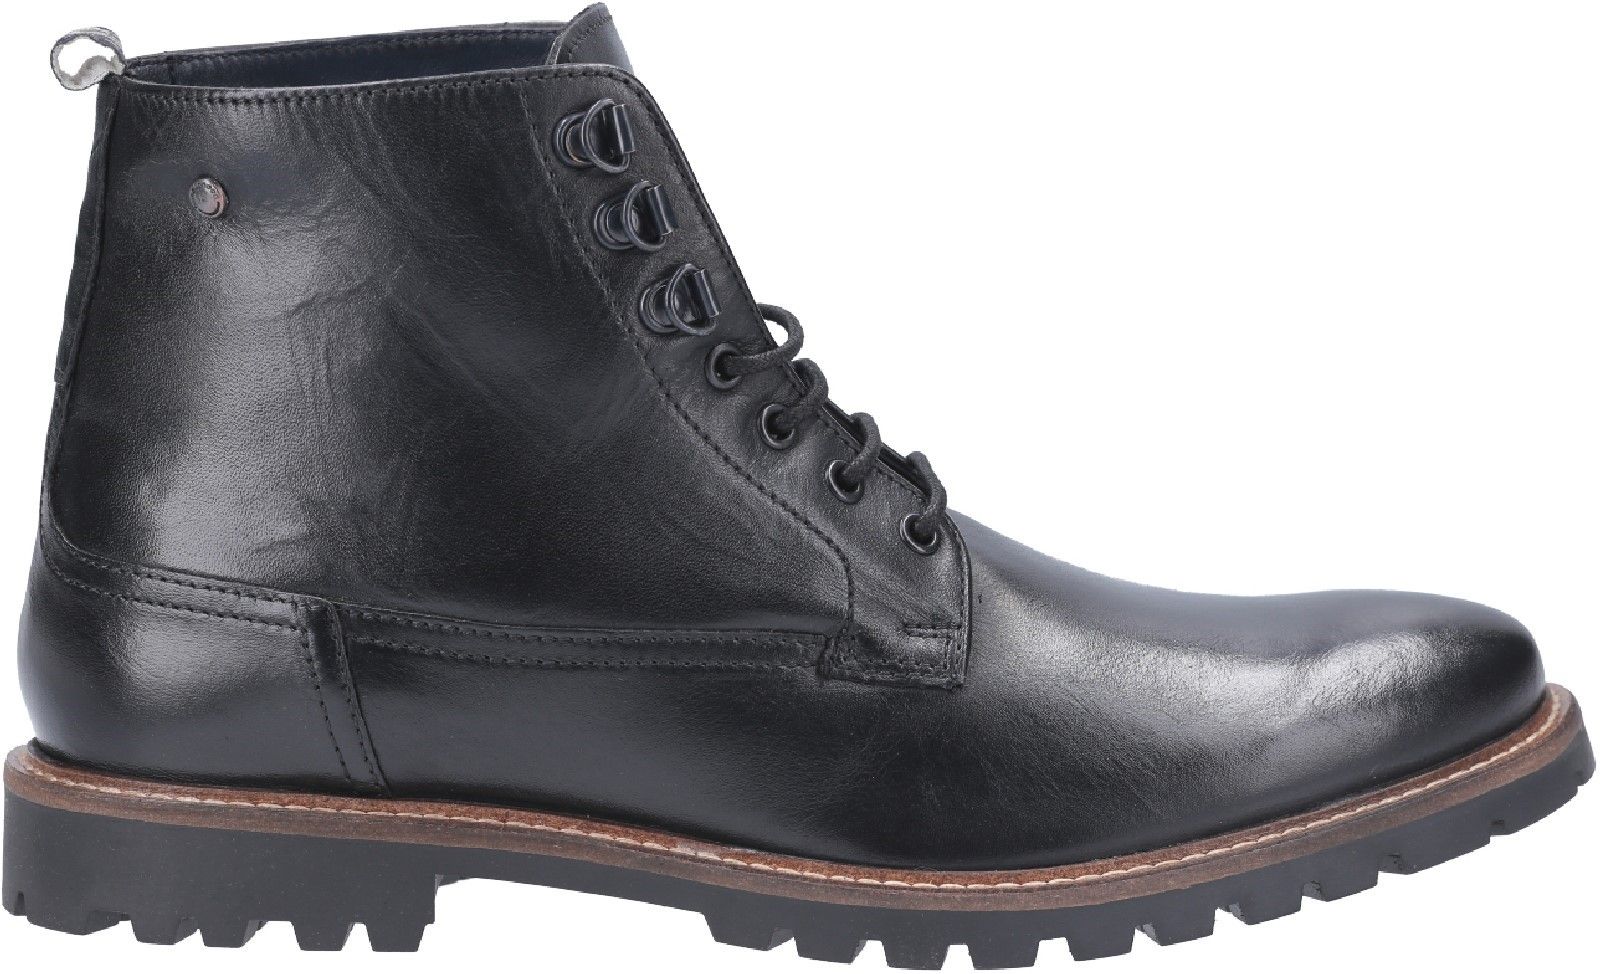 Callahan is a men's lace-up boot from Base London. Sitting firmly on a cleated rubber commando sole, Callahan is perfect for tackling the elements in style and the Ortholite inner-sole will keep your feet comfortable and dry all day.Lace Up Boot. 
Rubber Sole.